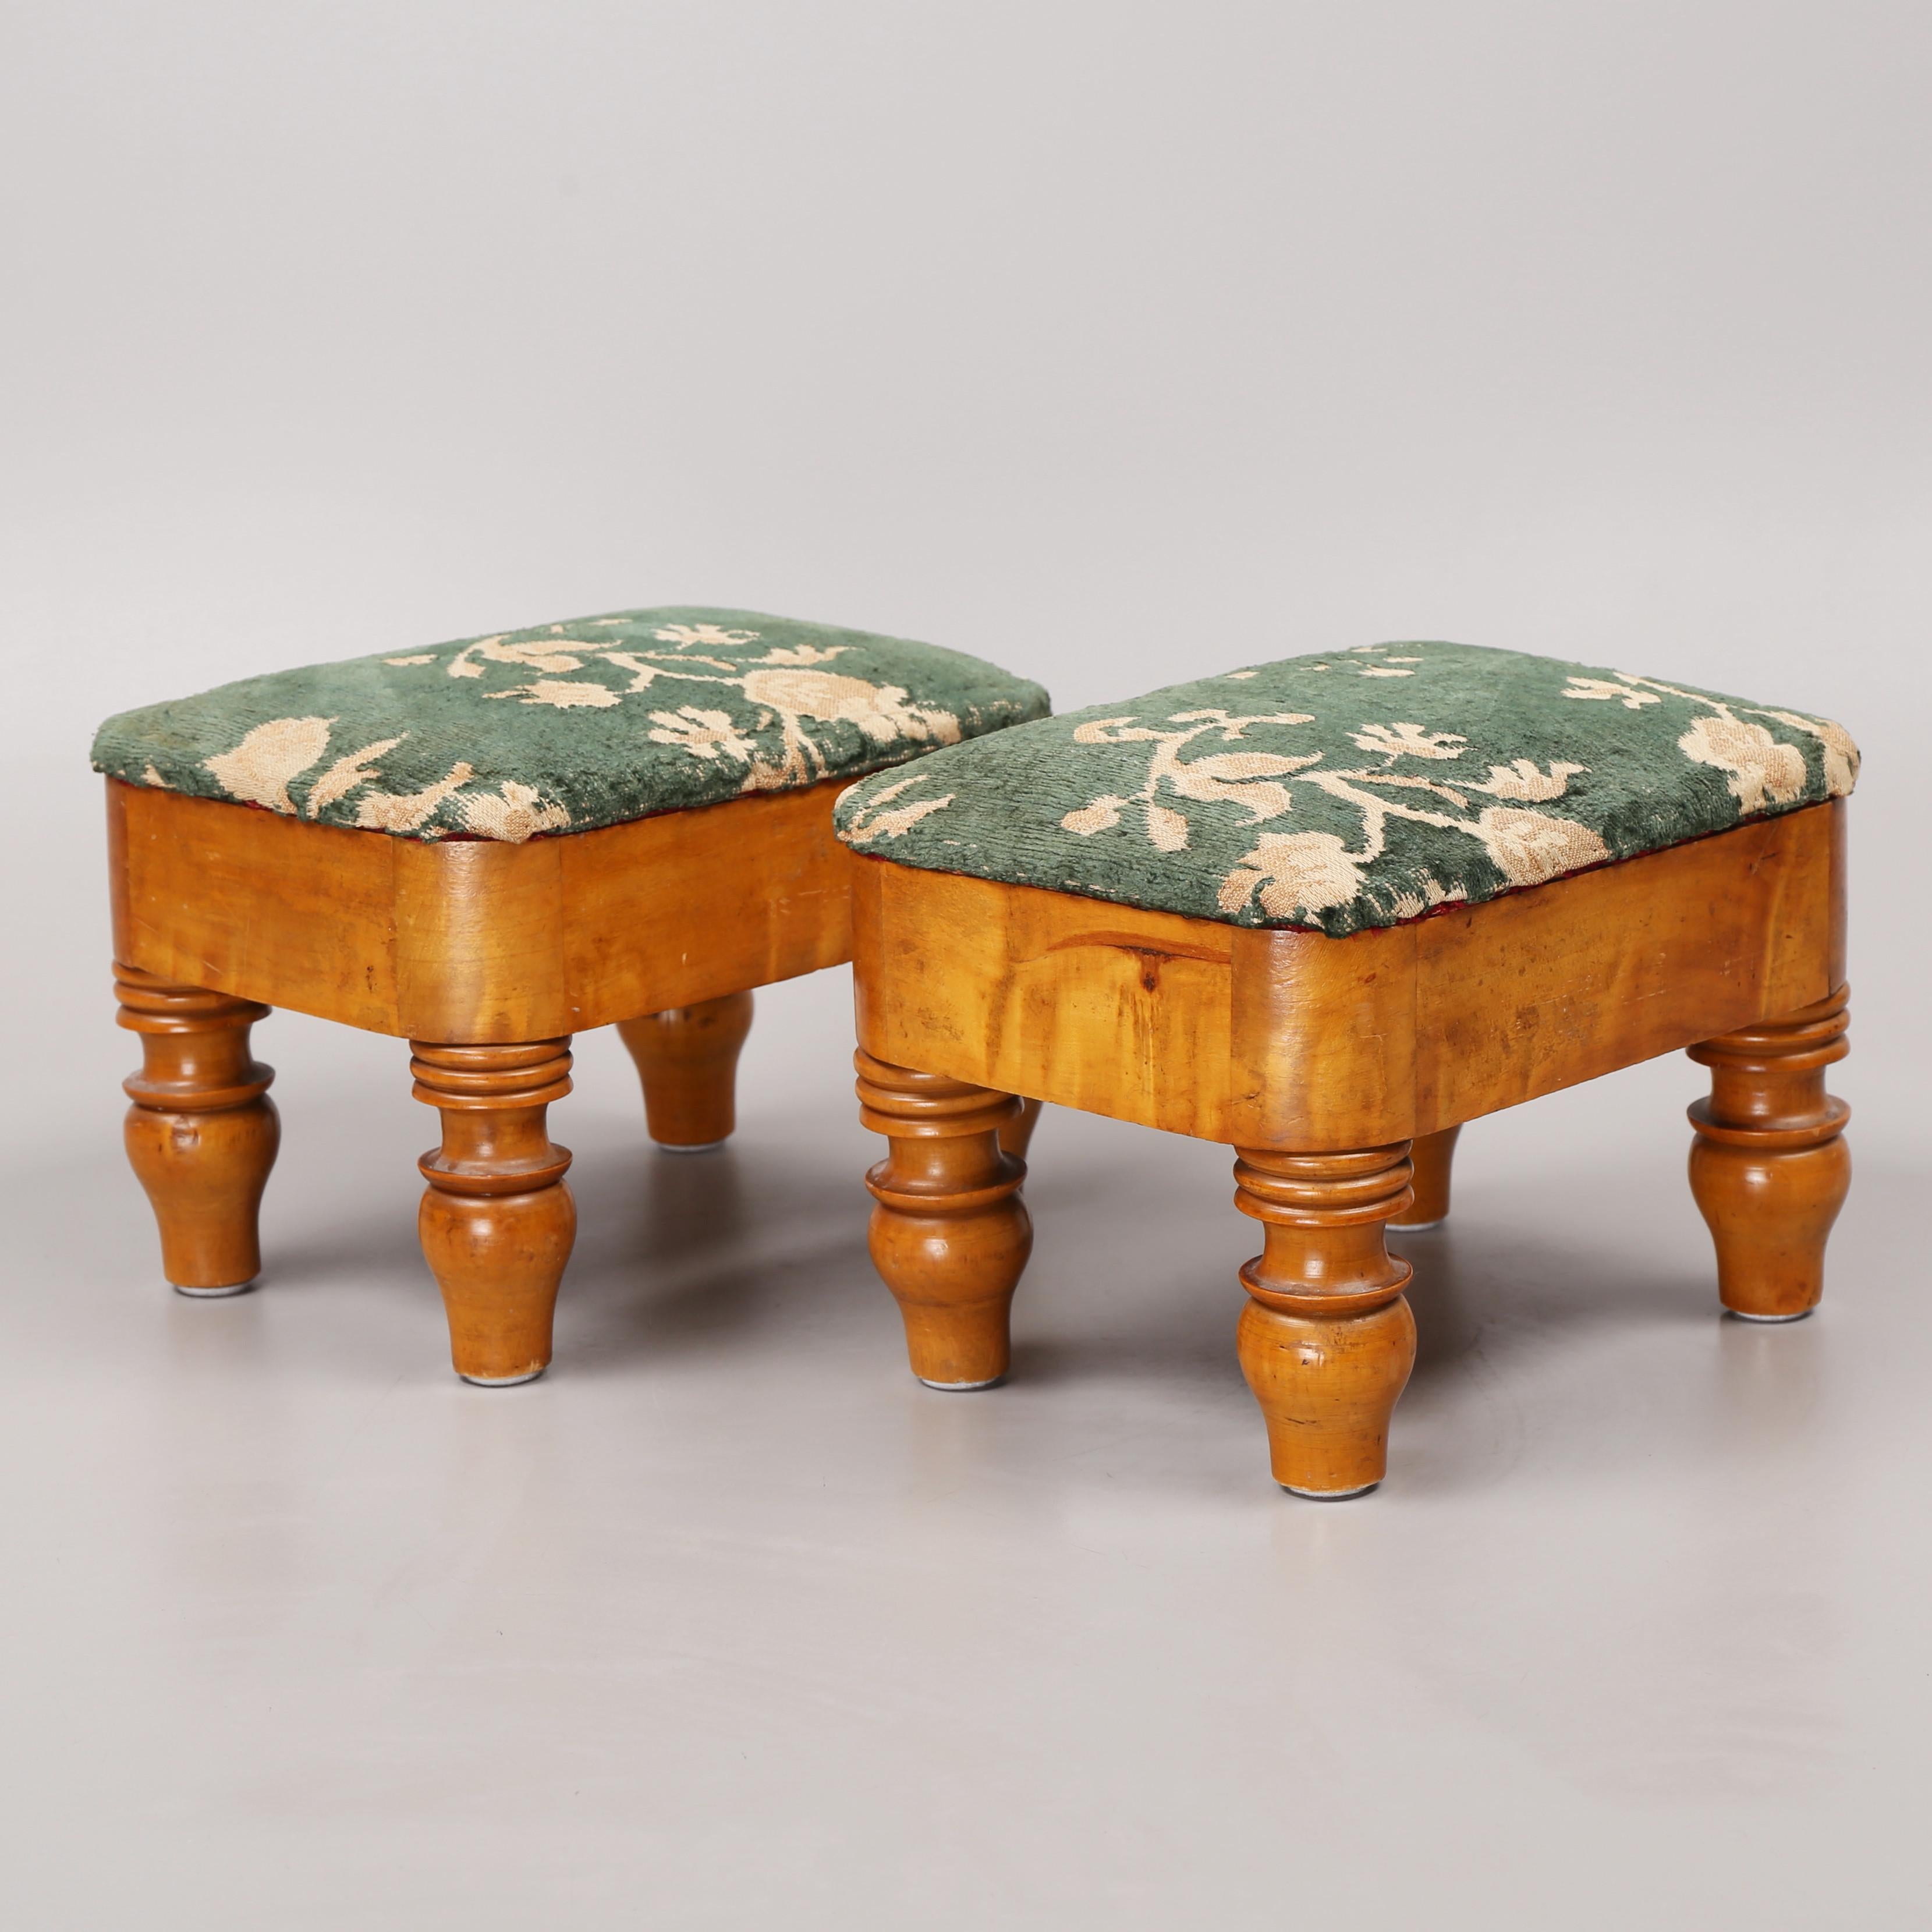 Art Nouveau Pair of Swedish Cabinetmaker Footstools in Birch and Green Velvet Upholstery For Sale